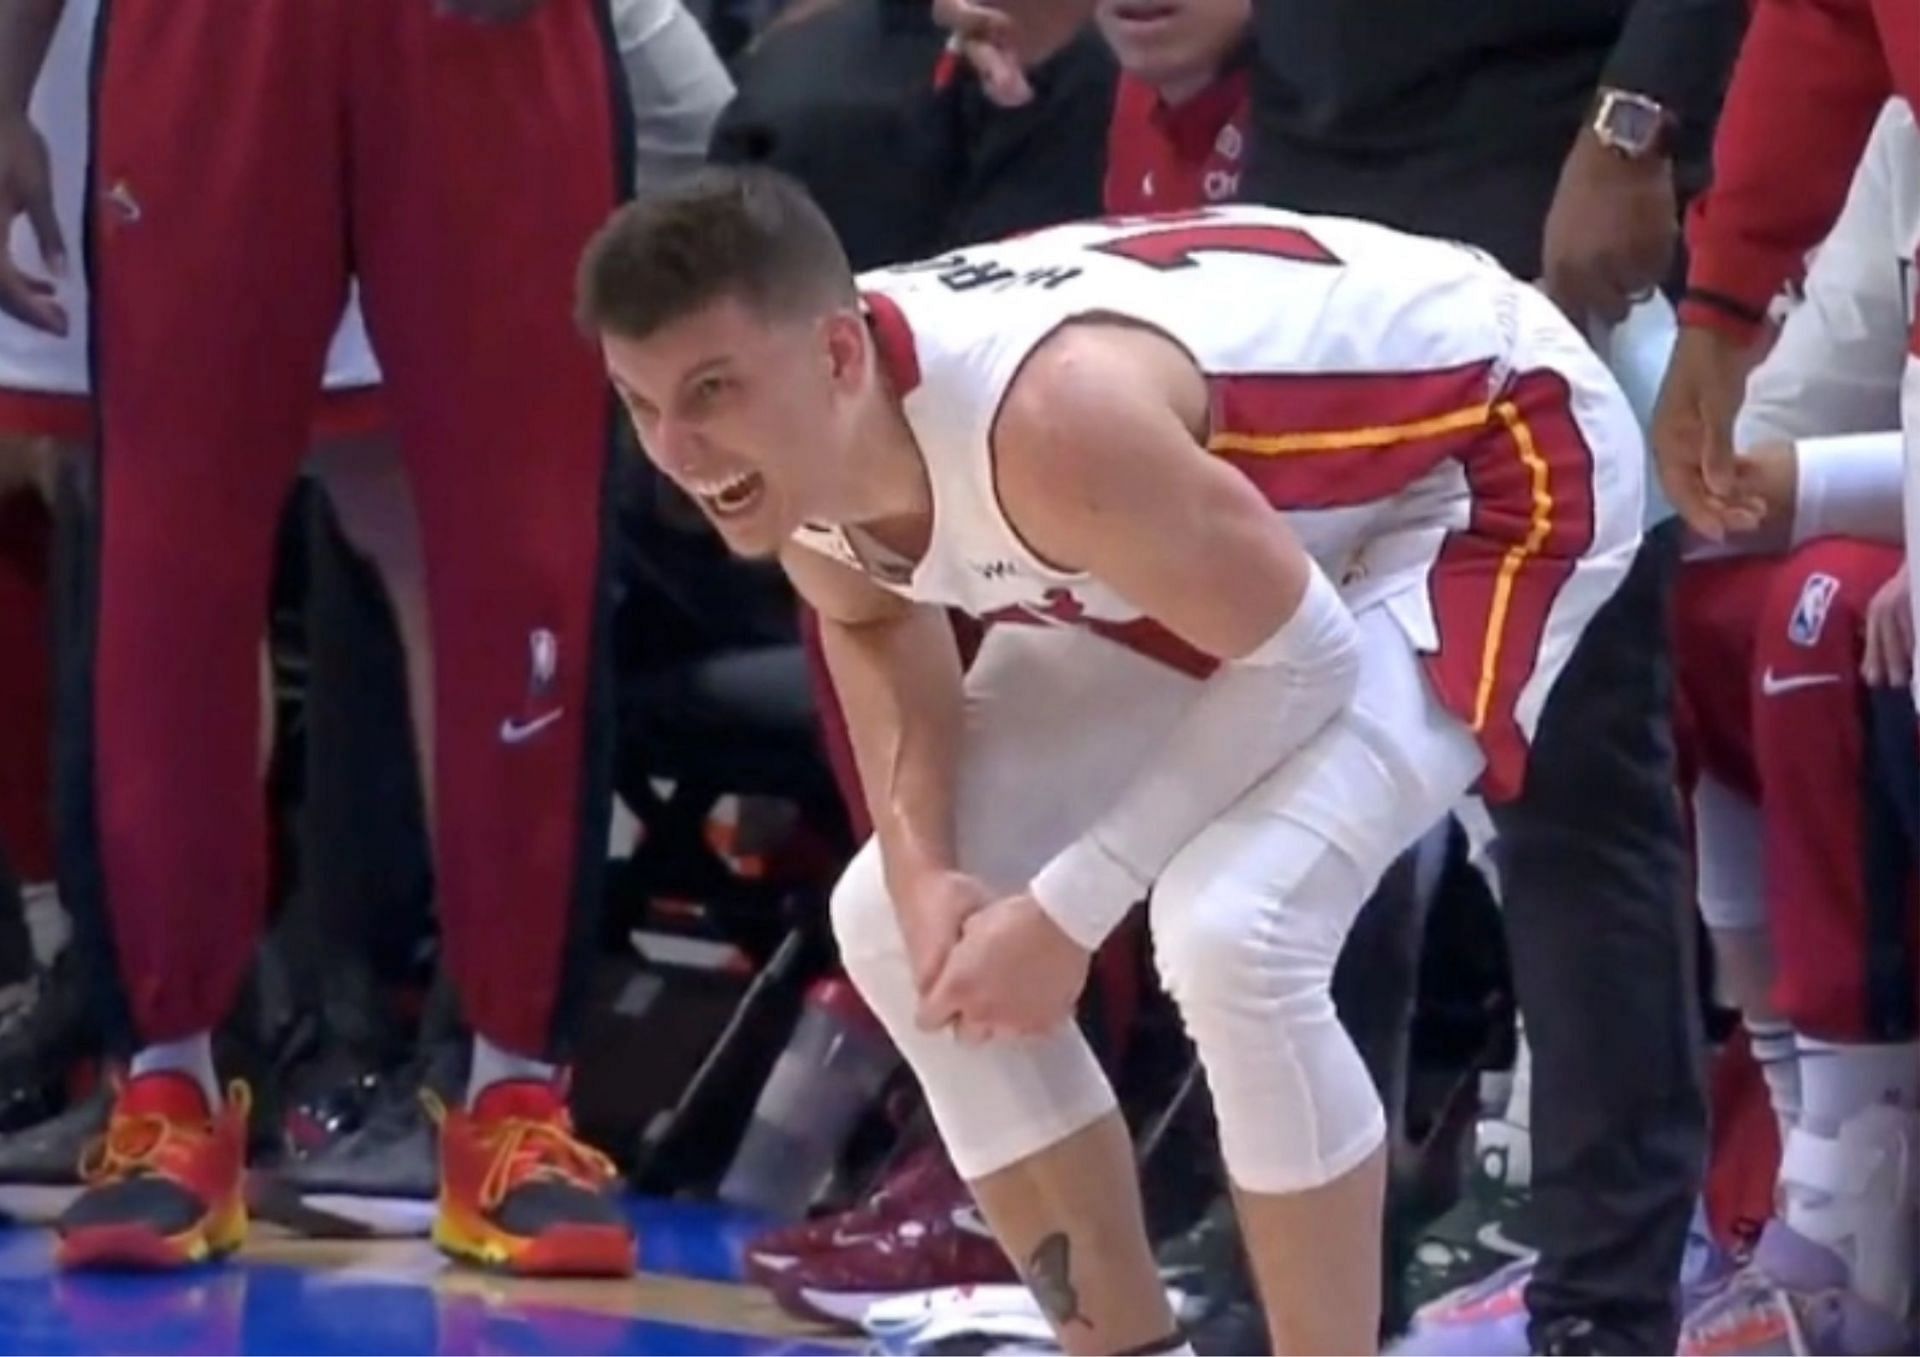 Tyler Herro broke his right hand in the second quarter of Game 1 between the Miami Heat and Milwaukee Bucks.